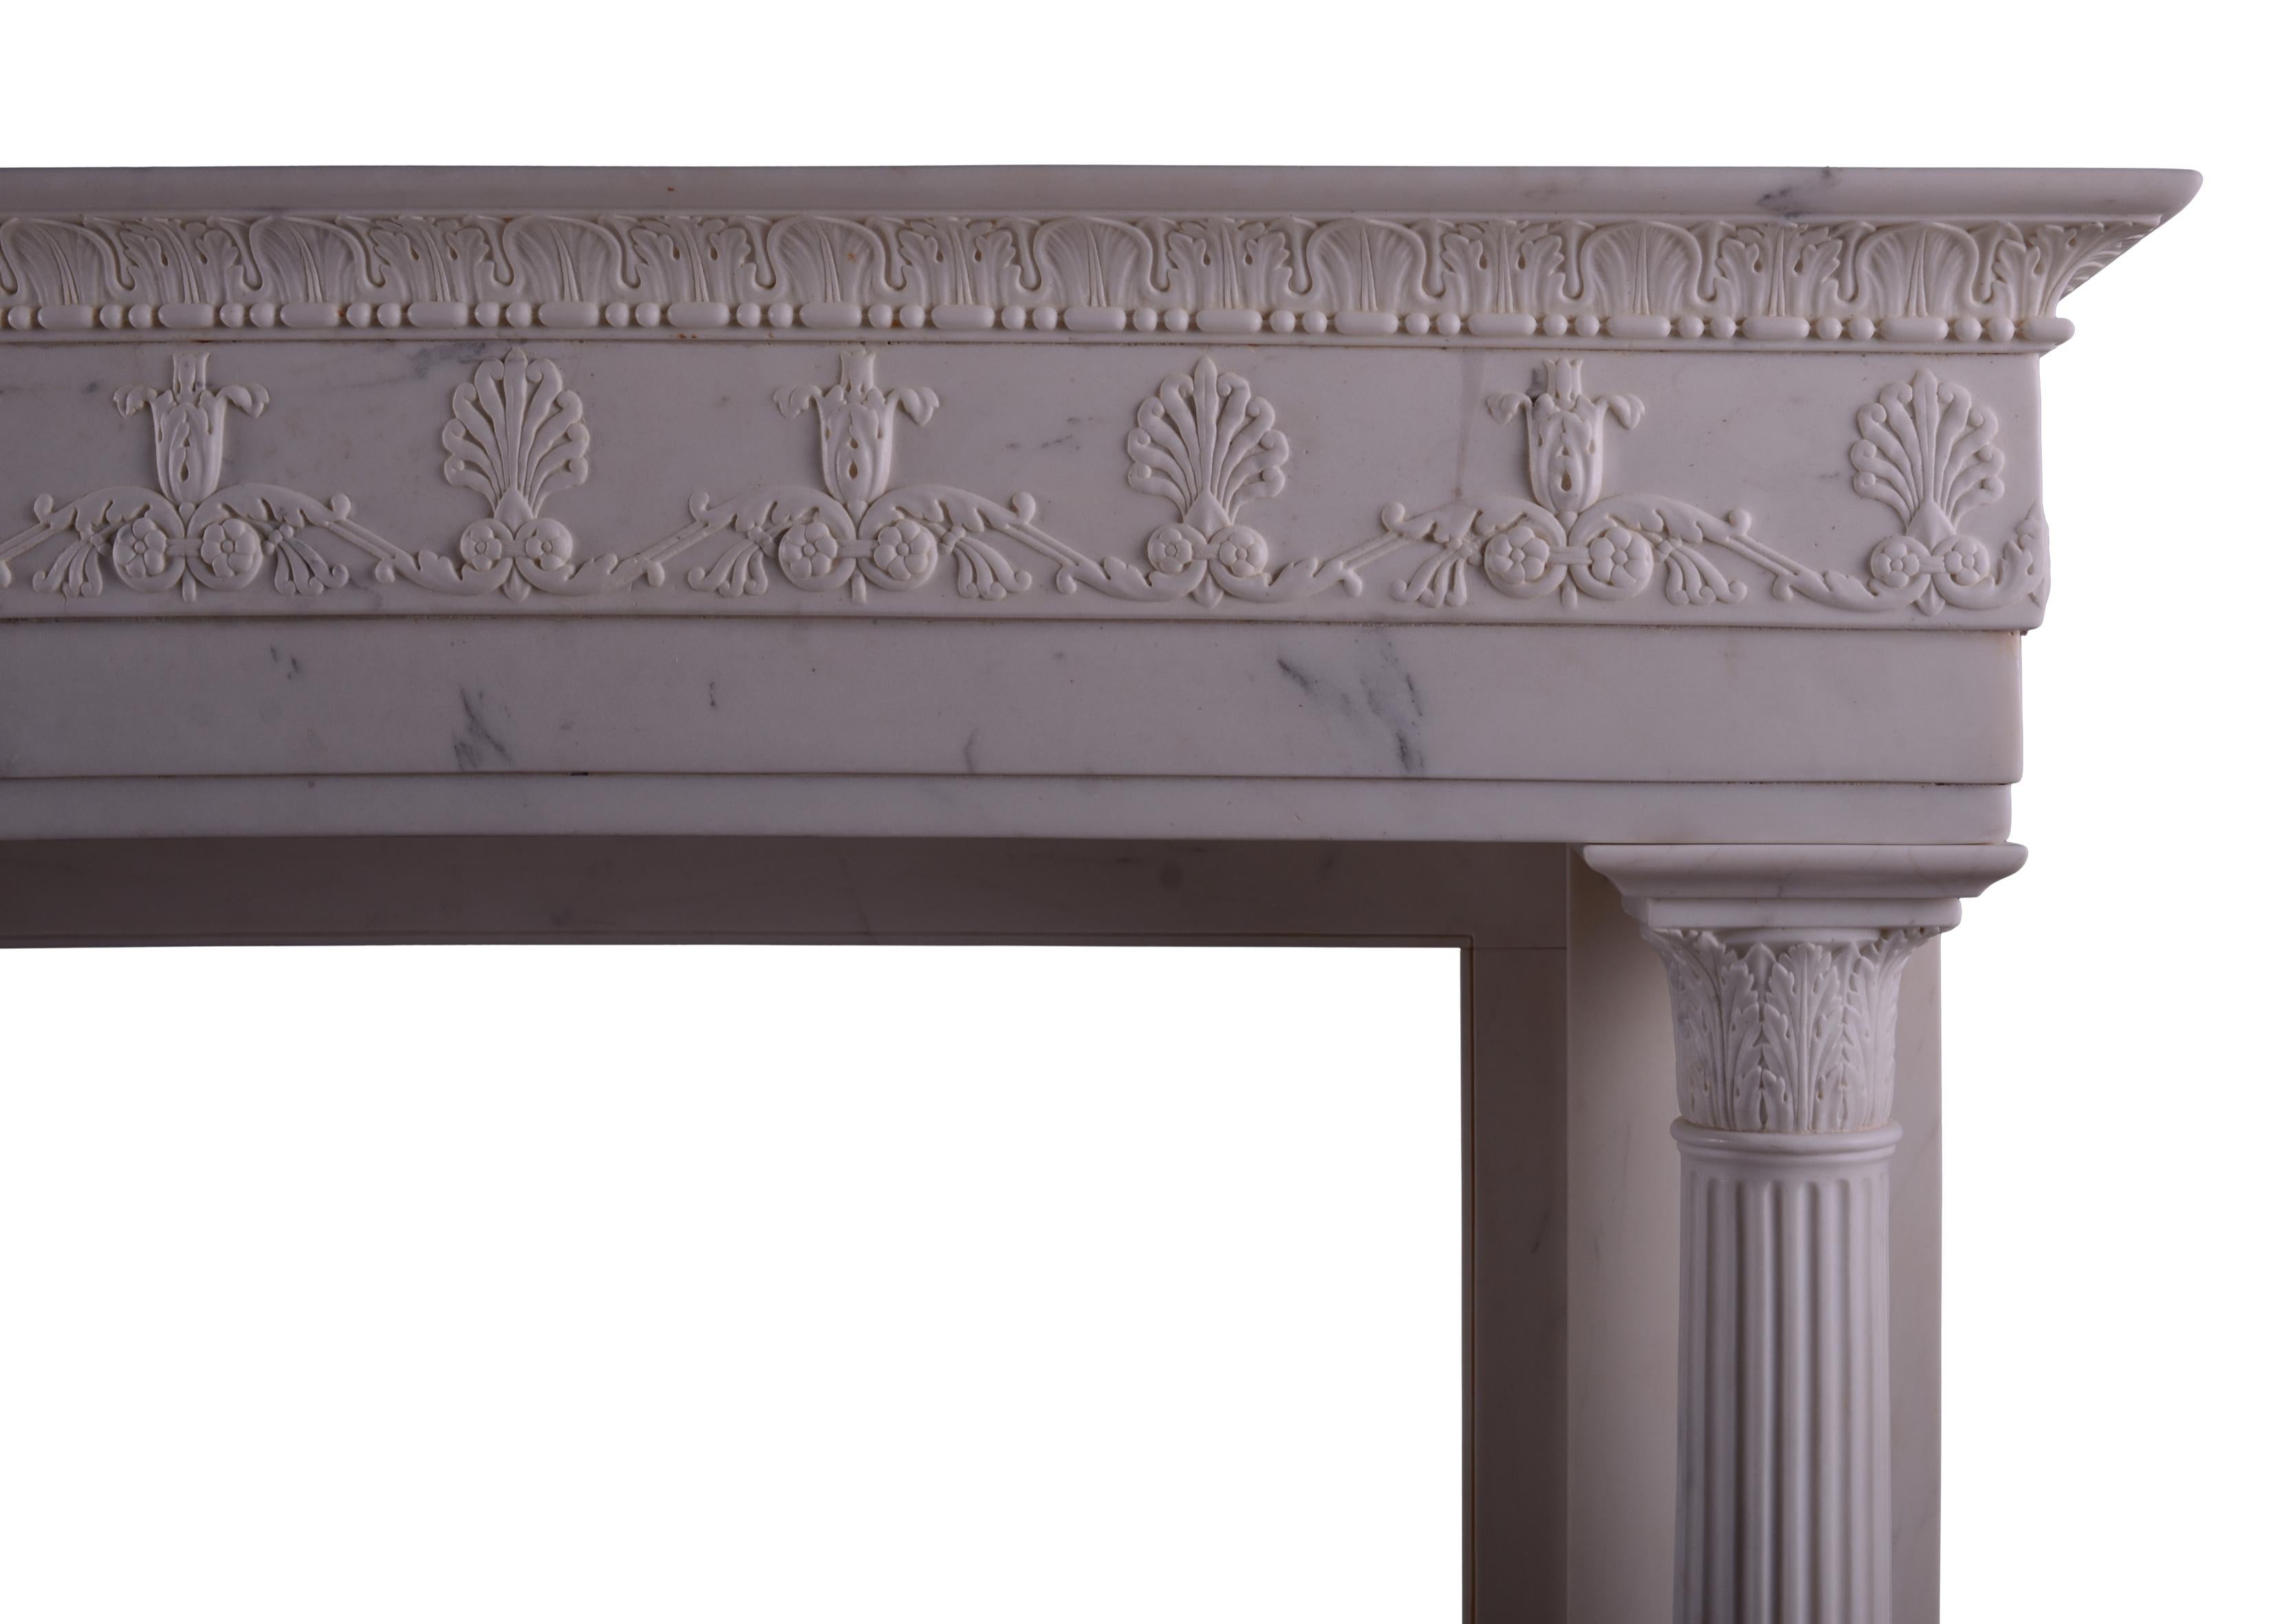 A very fine quality period Regency statuary marble fireplace. The jambs with columns with stiff acanthus leaves to base surmounted by tapering flutes and matching acanthus to top. The frieze with classical Anthemion motif, scrollwork and paterae